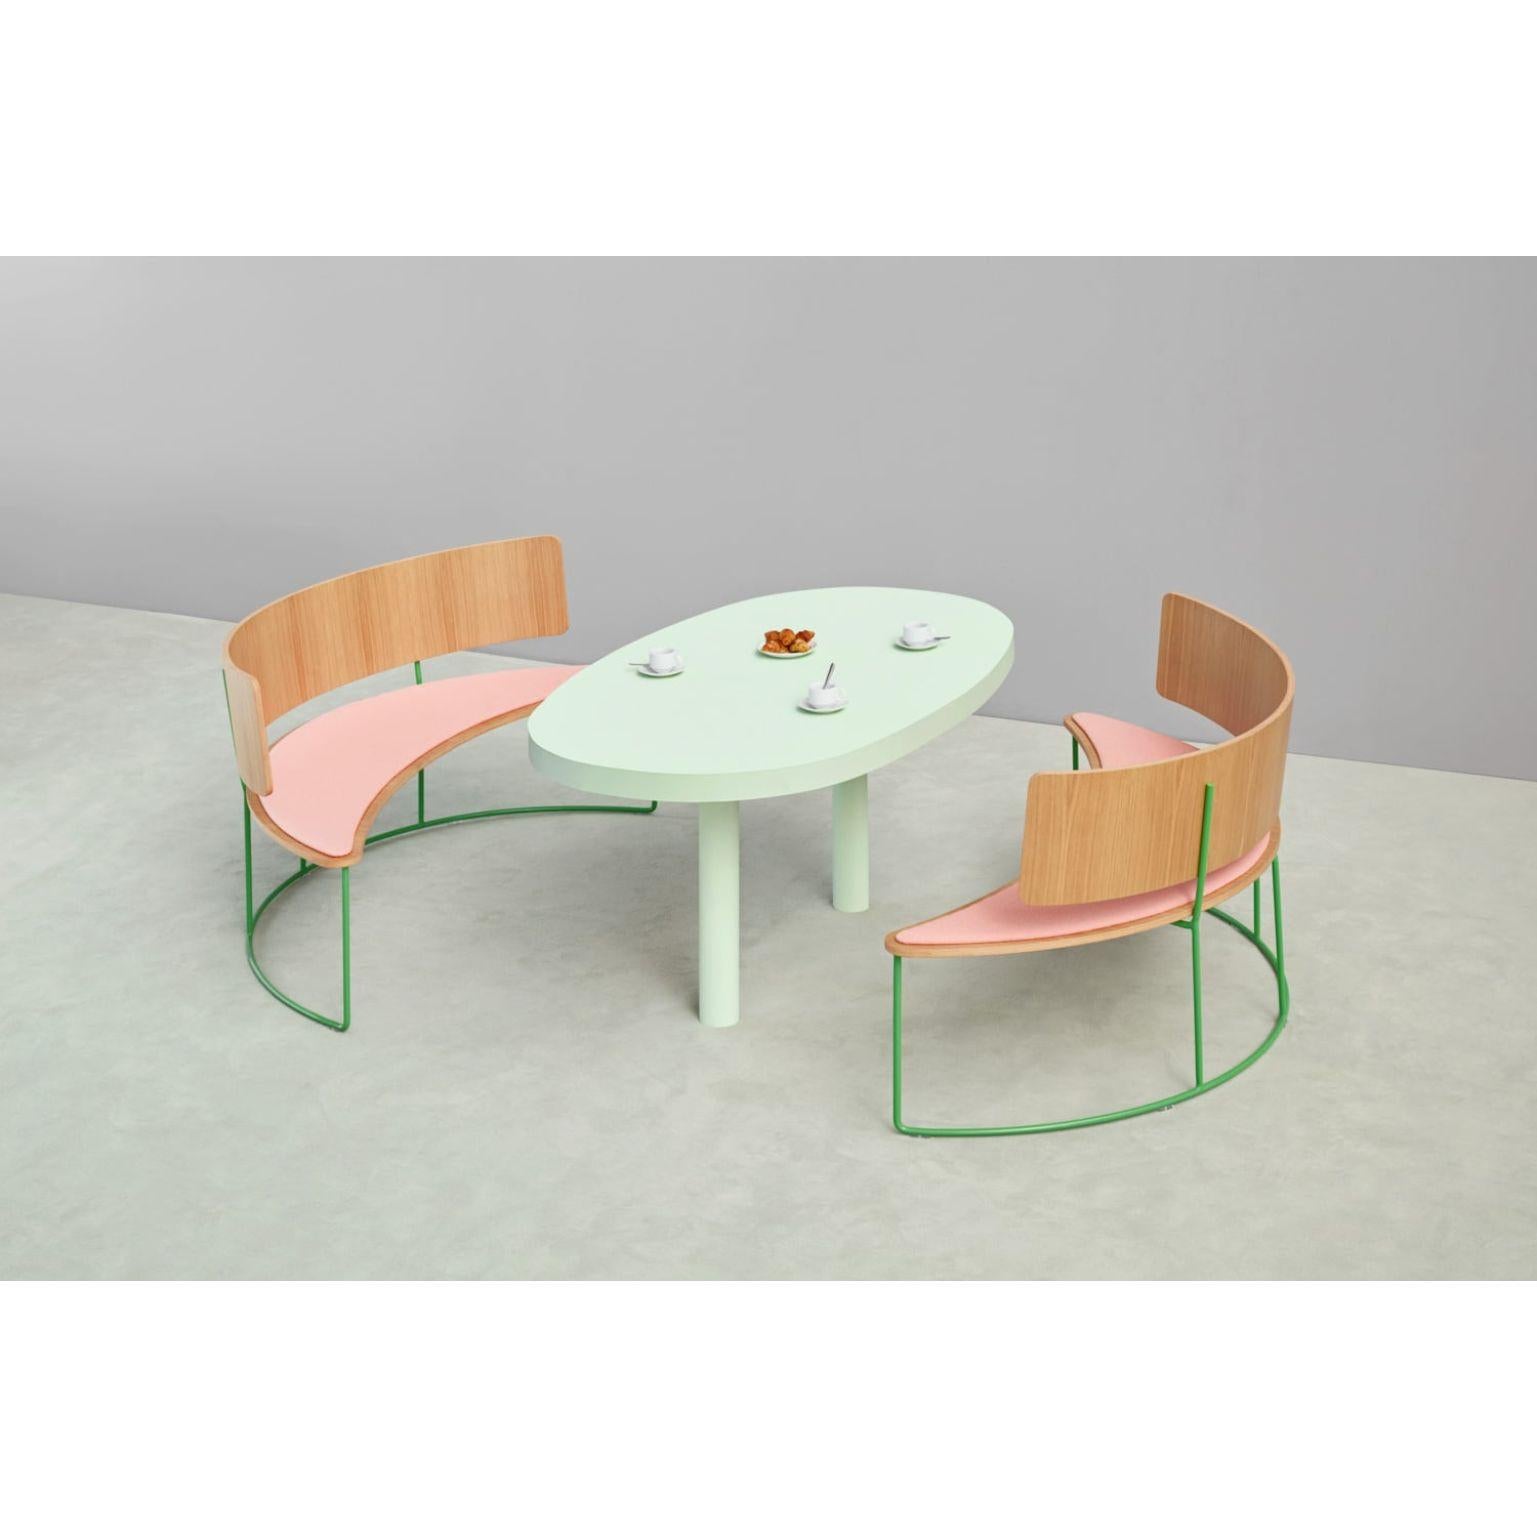 Set of 2 boomerang benches, Pink by Pepe Albargues
Dimensions: W152, D72, H79, Seat 43
Materials: Paint coated iron structure / gold / copper or chromed iron structure
Plywood backrest and seat covered with a natural oak wood layer
Upholstered